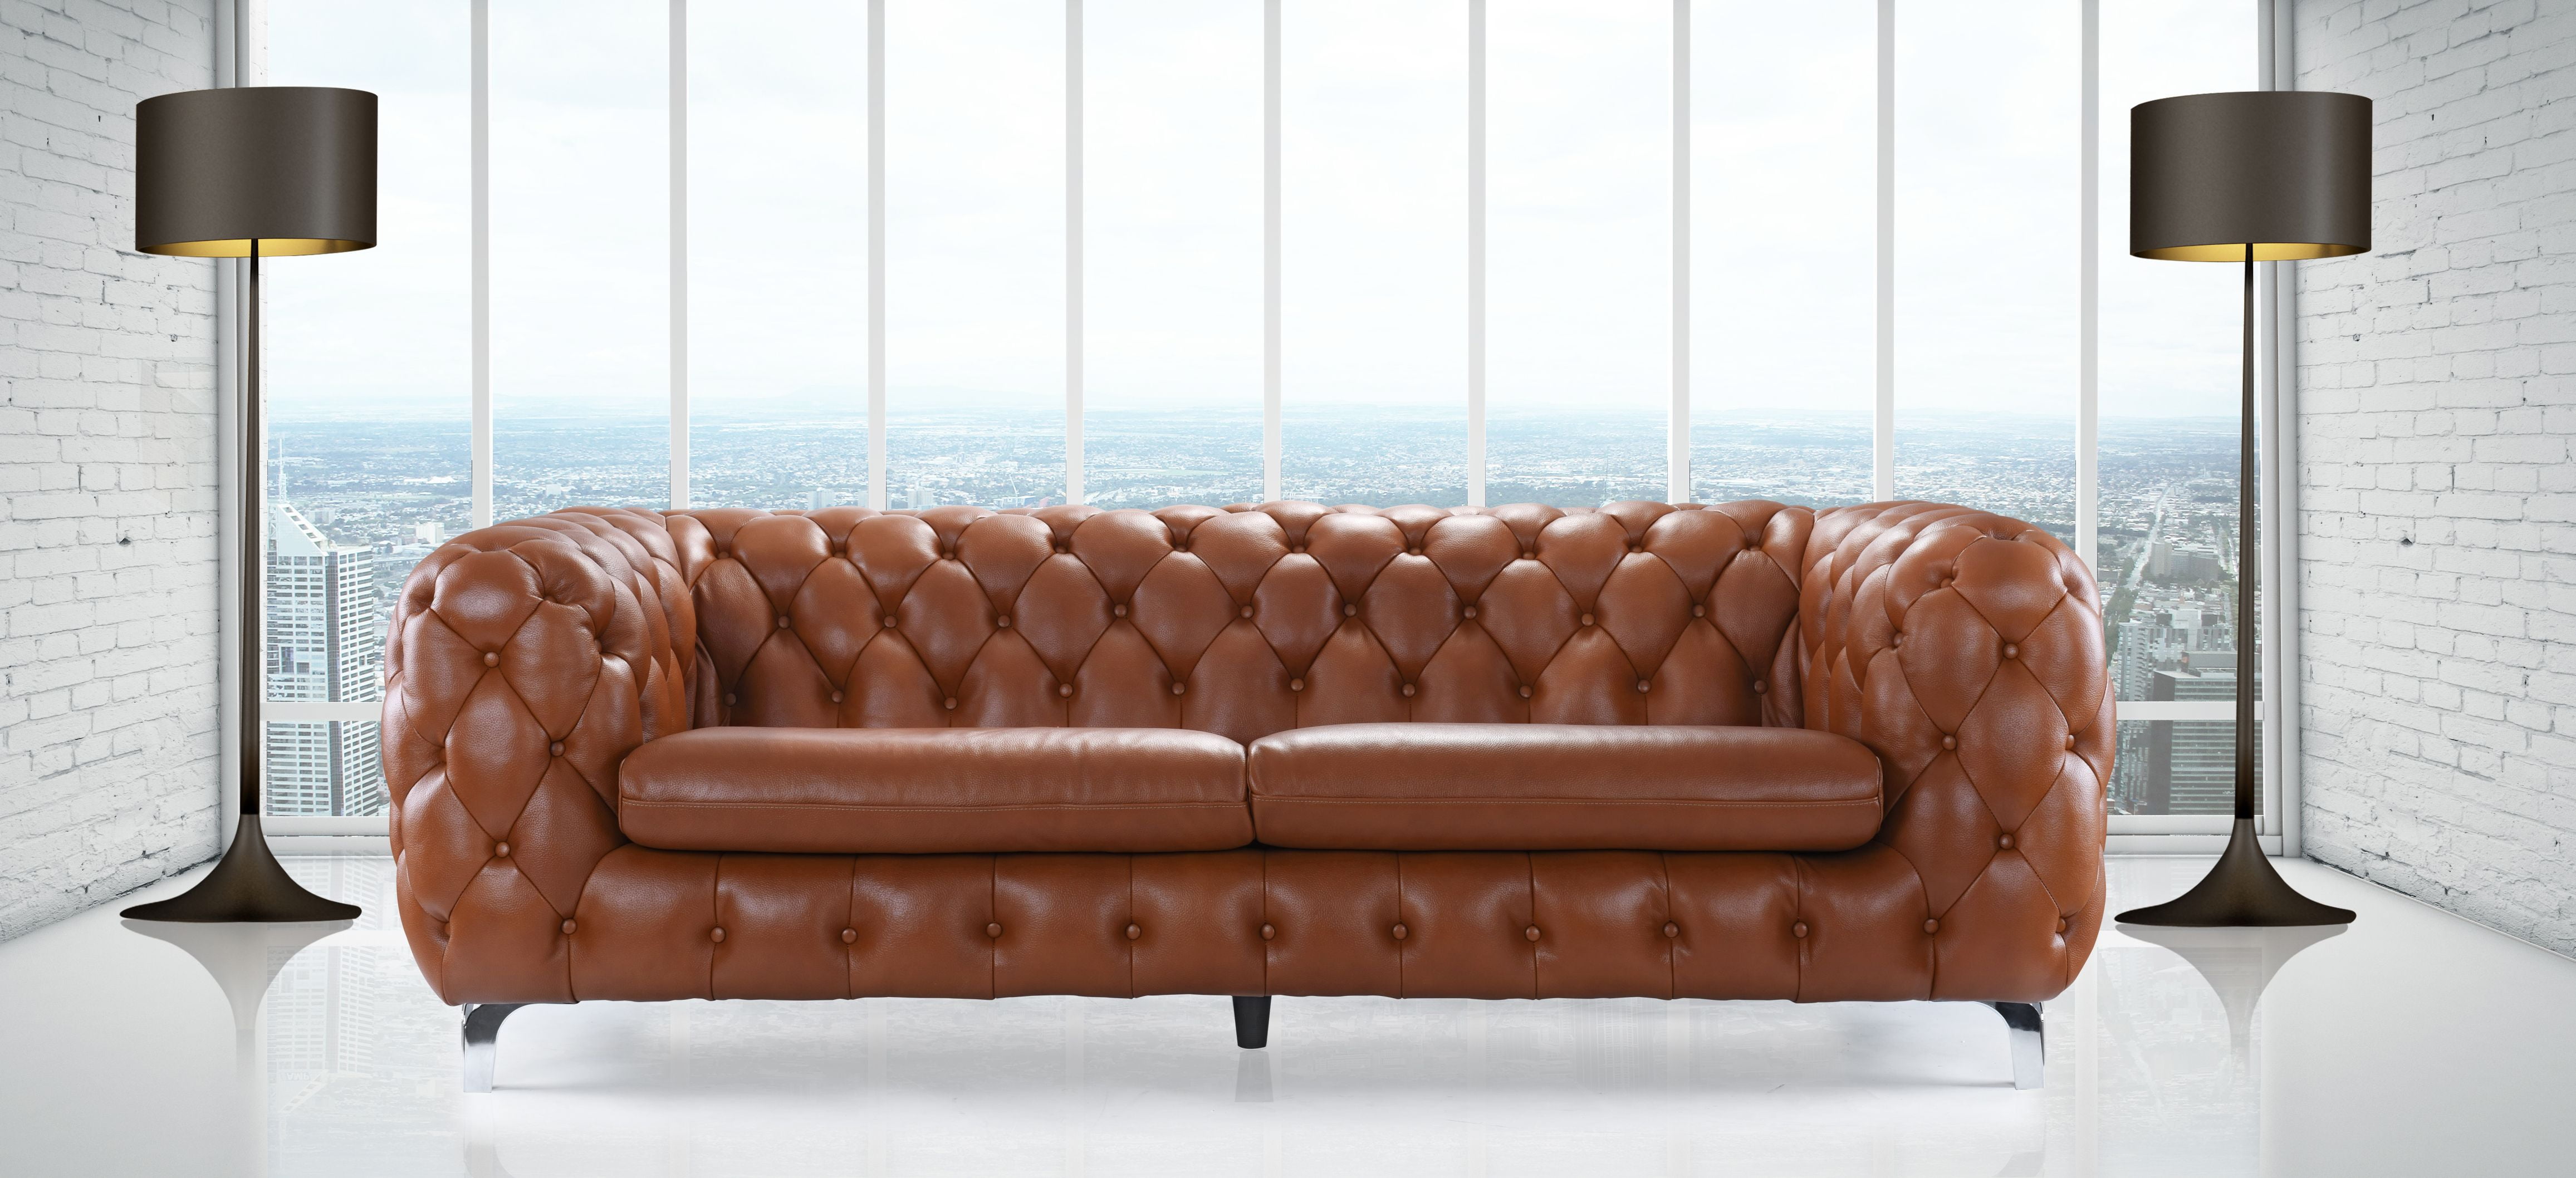 Chesterfield Real Leather Tufted Sofa Couch with Built-in ...